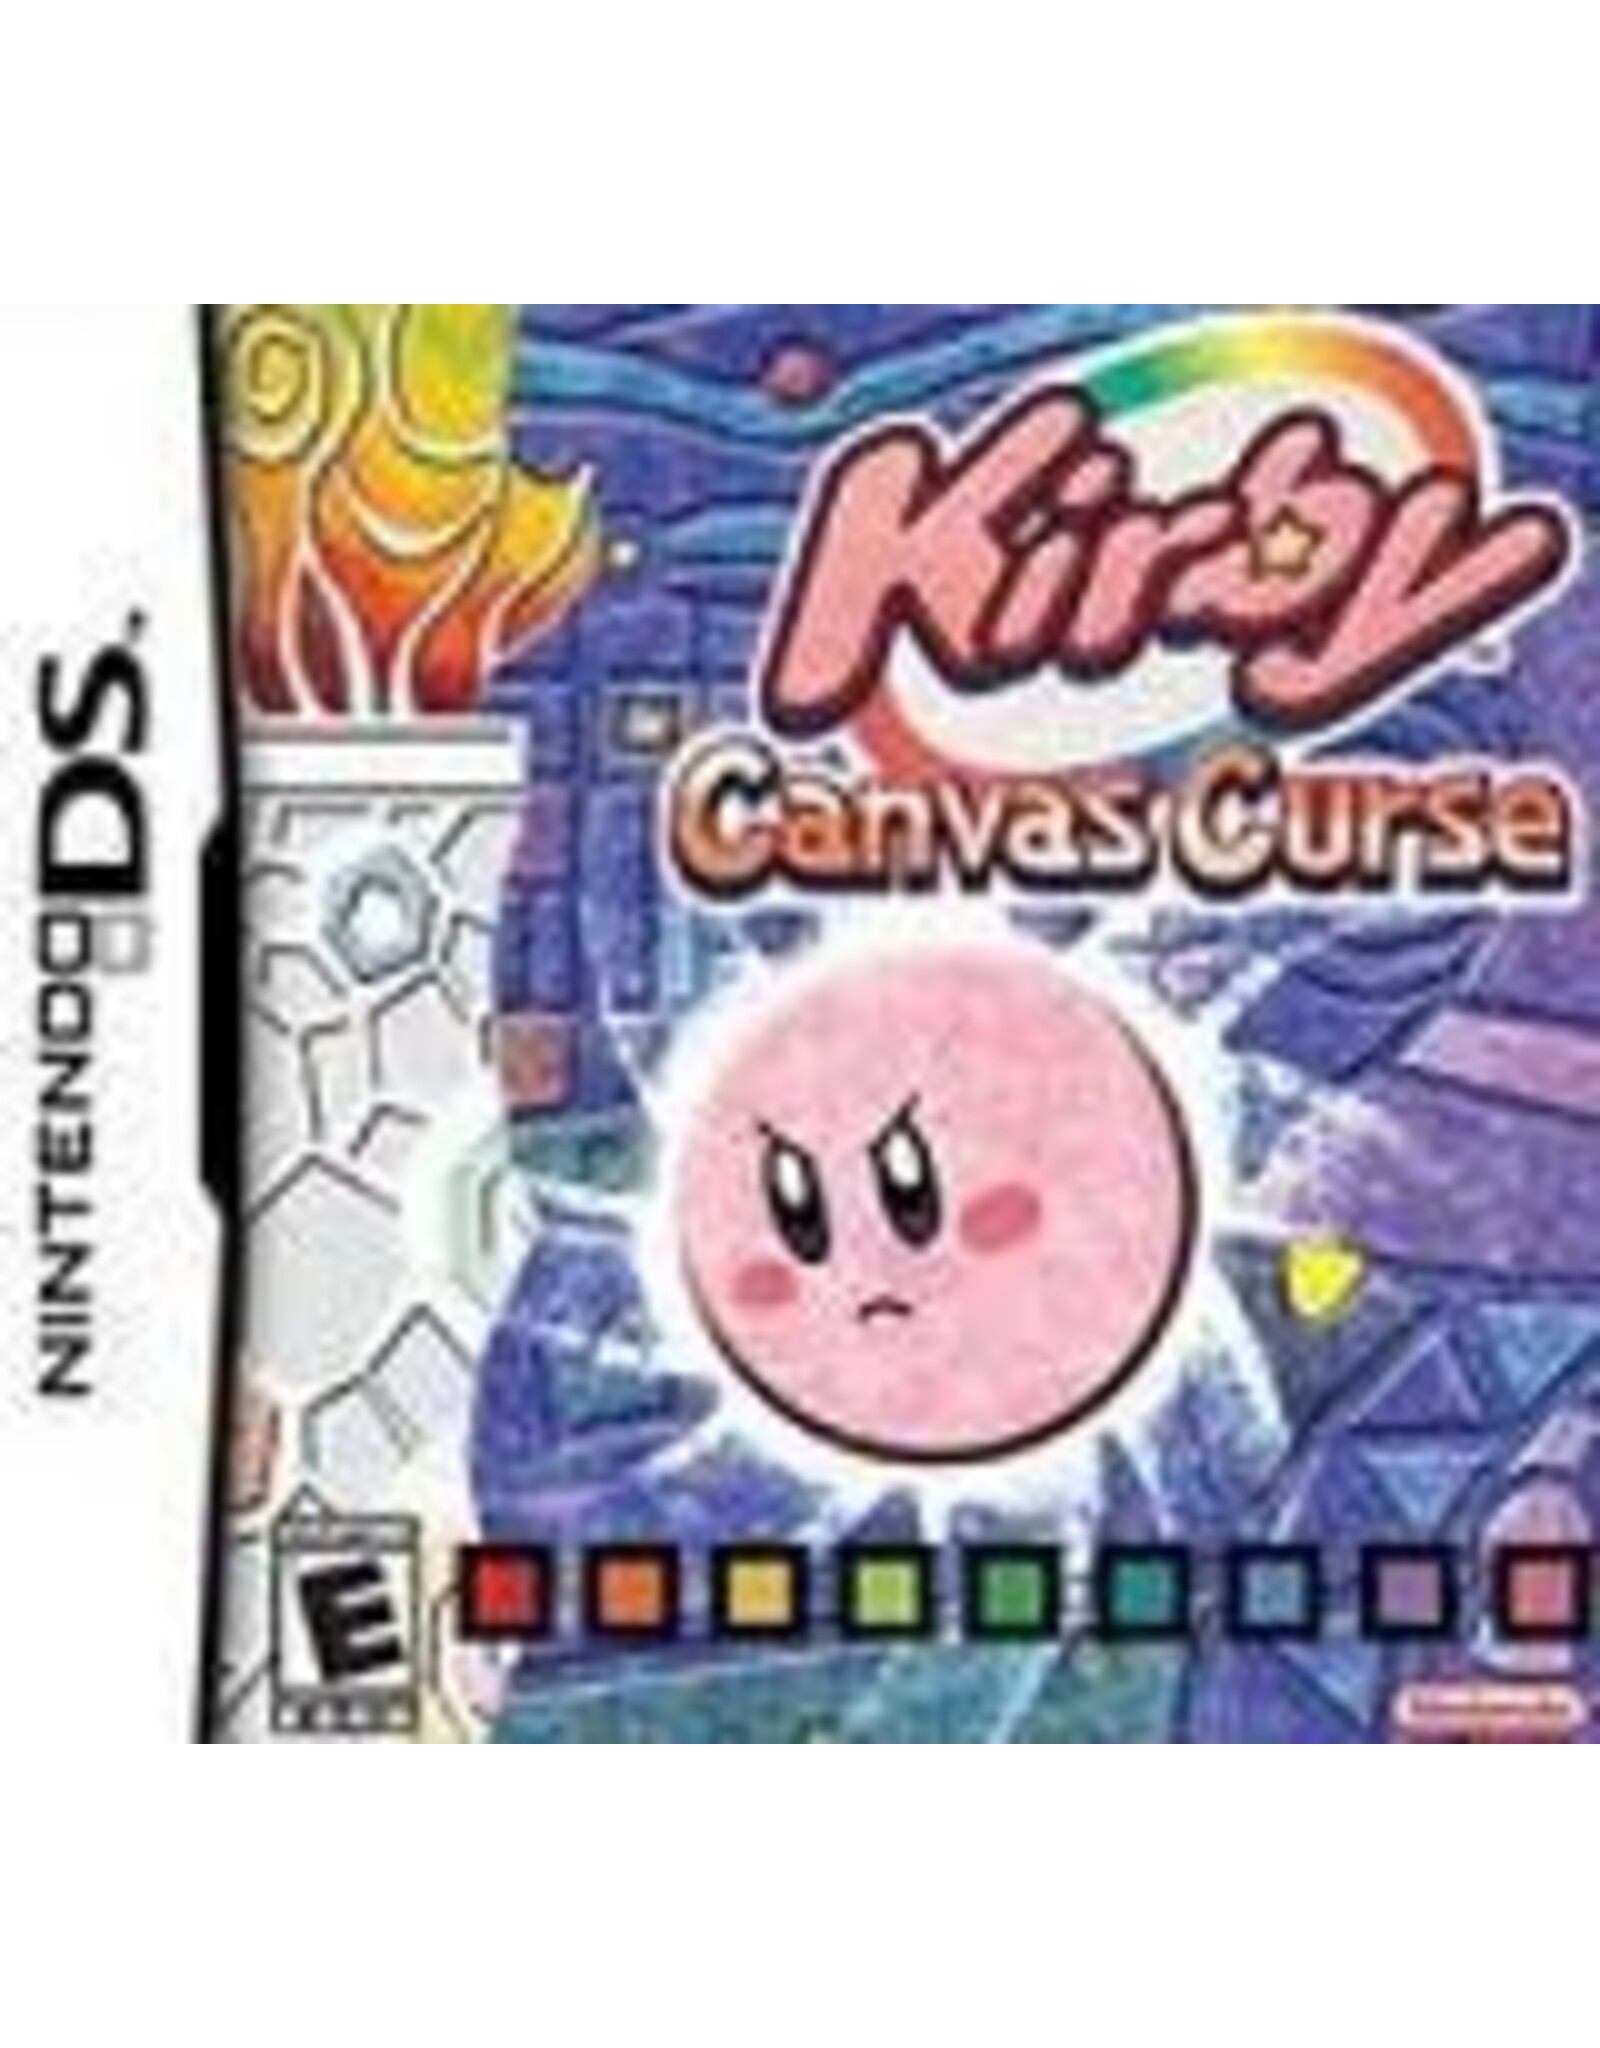 Nintendo DS Kirby Canvas Curse (Used)